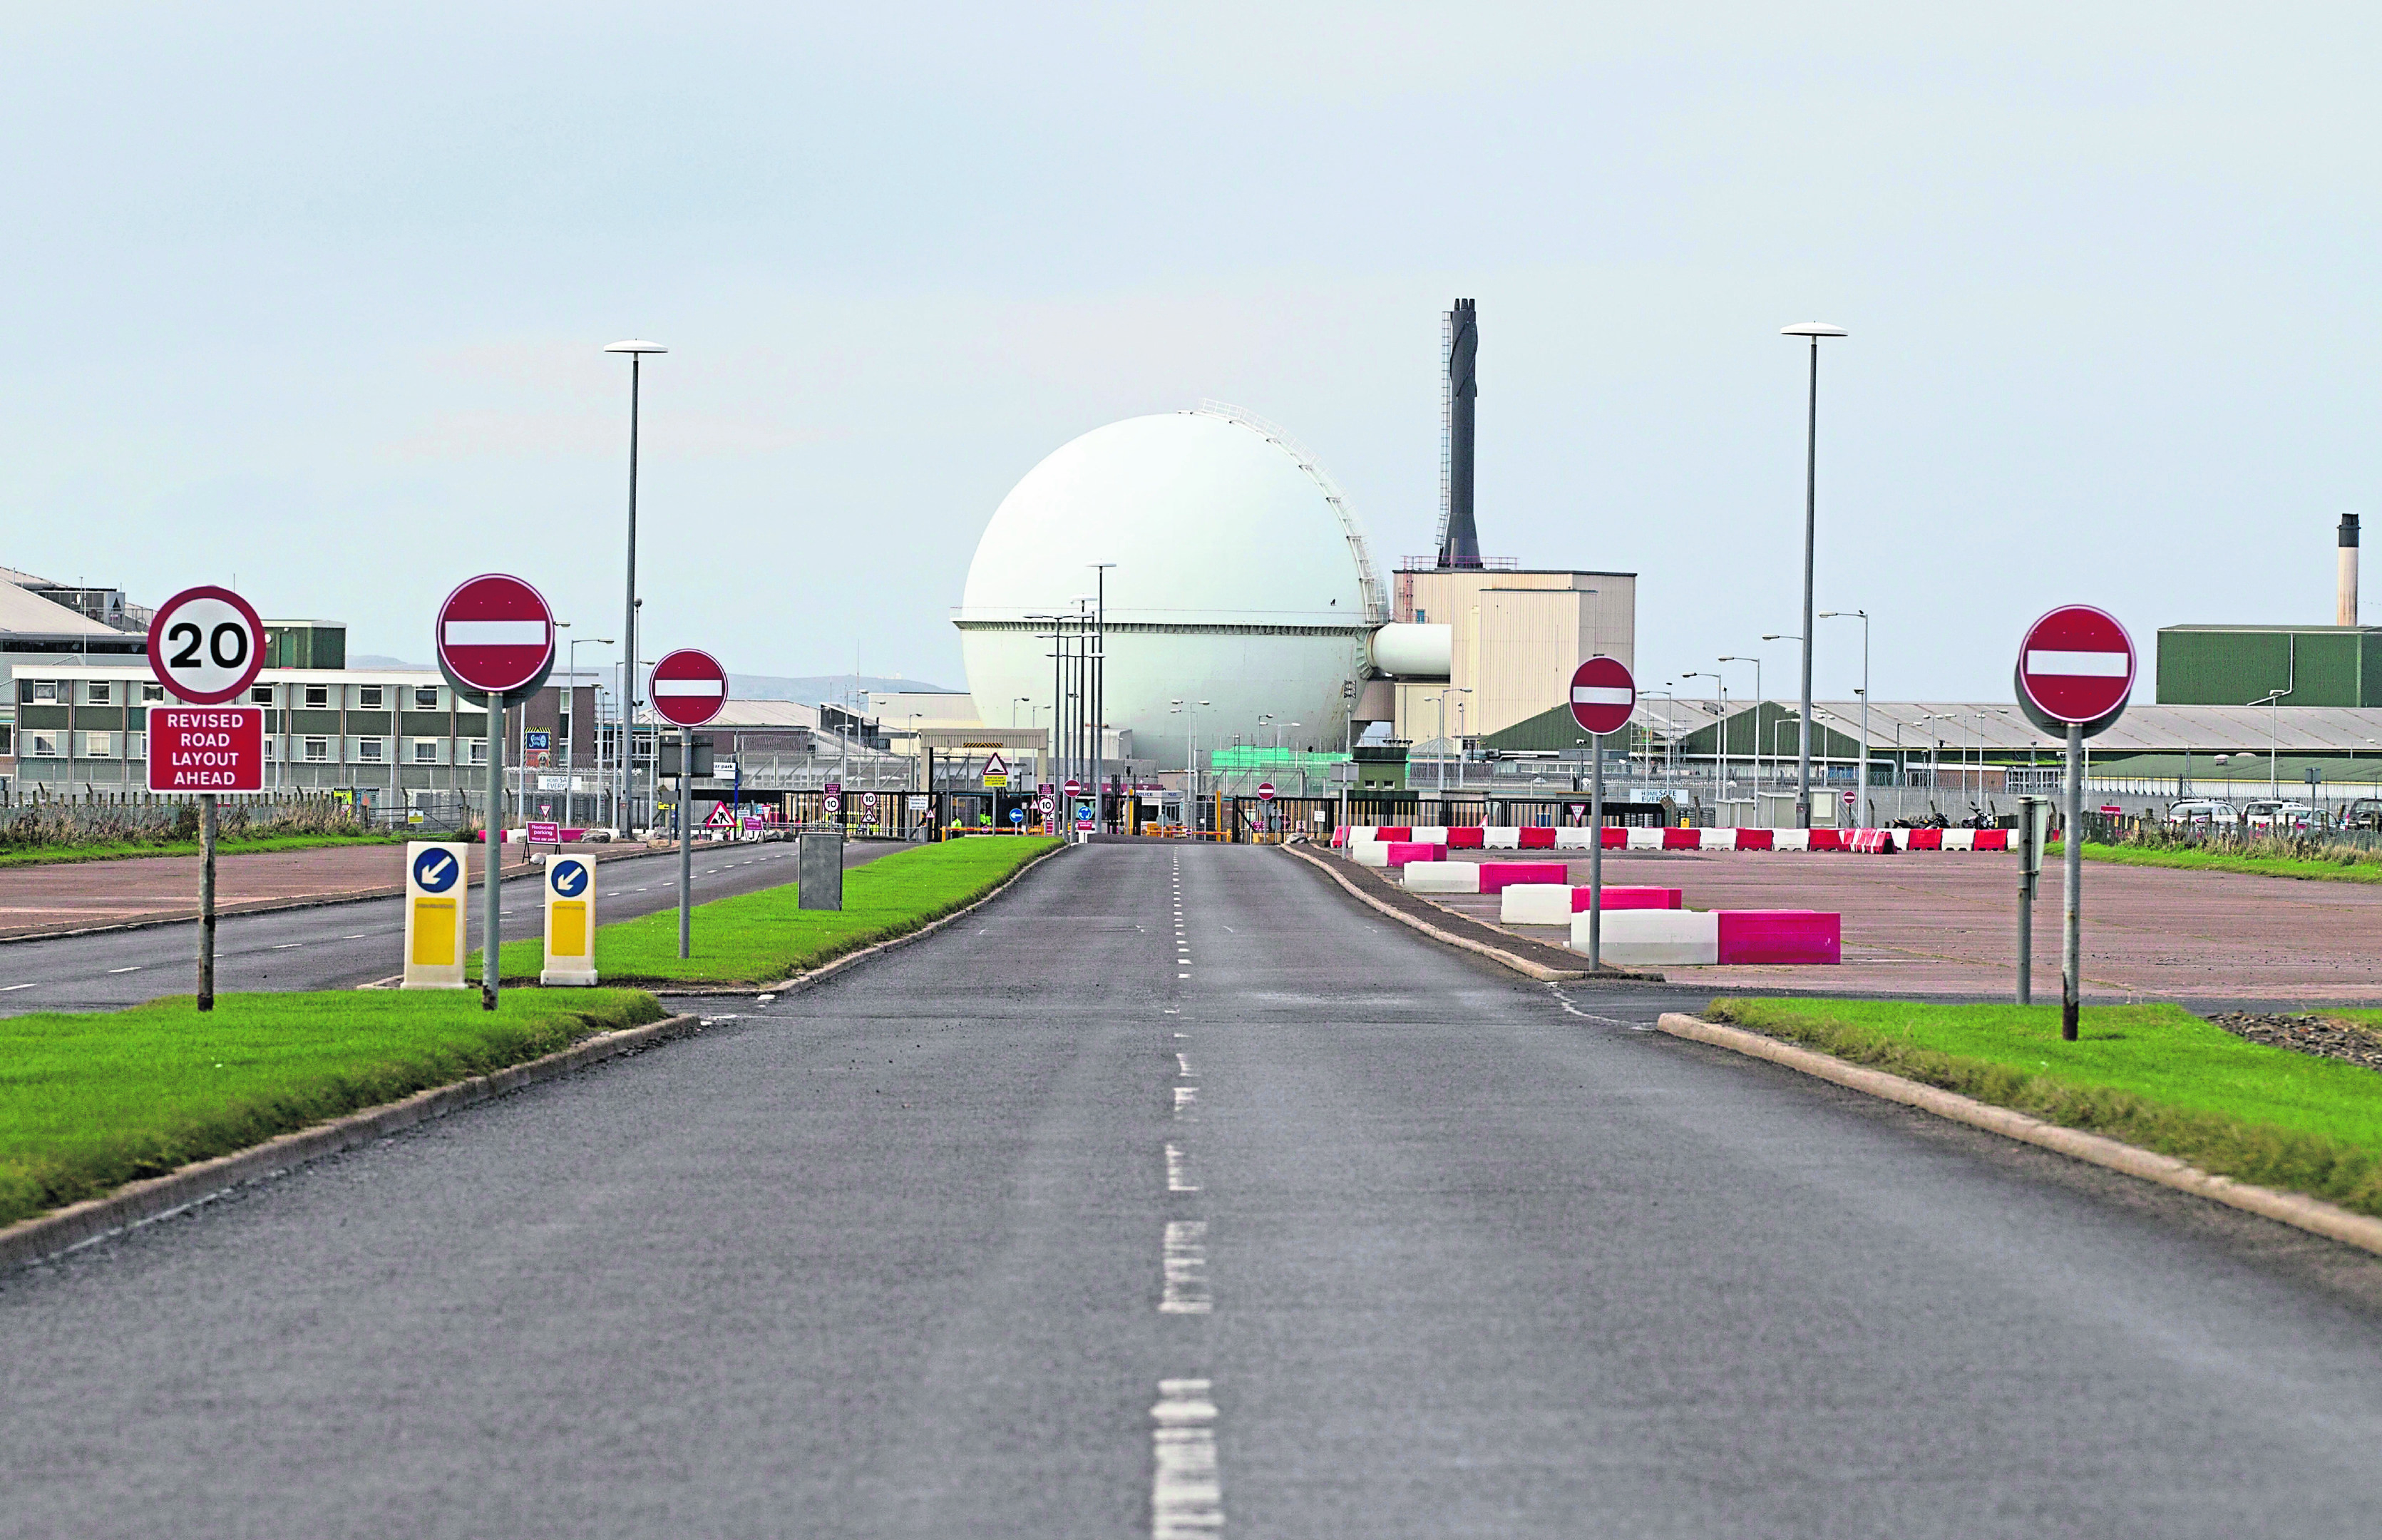 Work is progressing on taking apart one of the "highest hazards" in the UK civil nuclear industry.